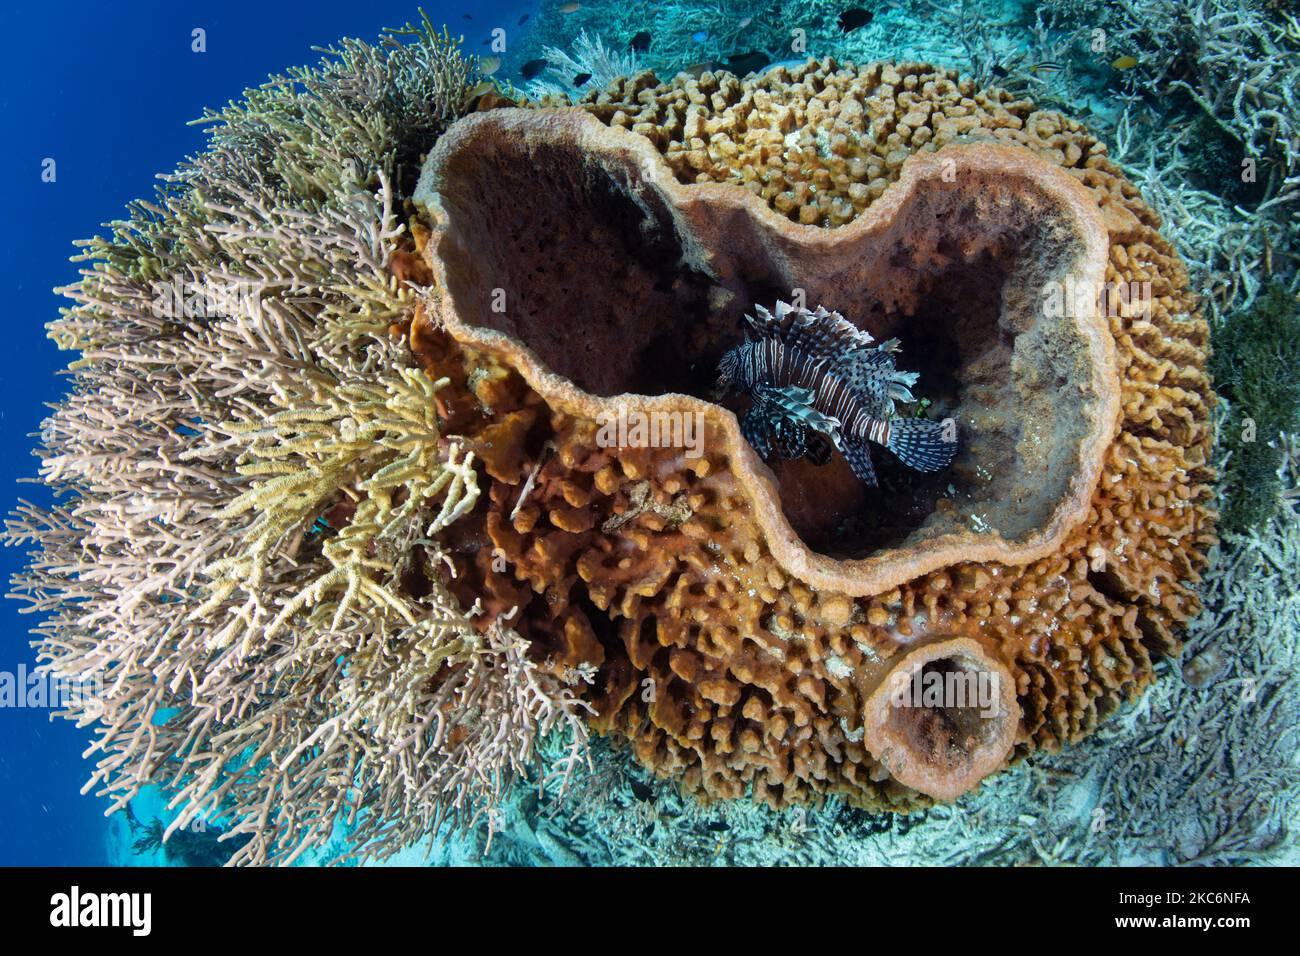 A lionfish, Pterois volitans, rests inside a large barrel sponge on a coral reef in Indonesia. Lionfish are voracious predators of small prey. Stock Photo